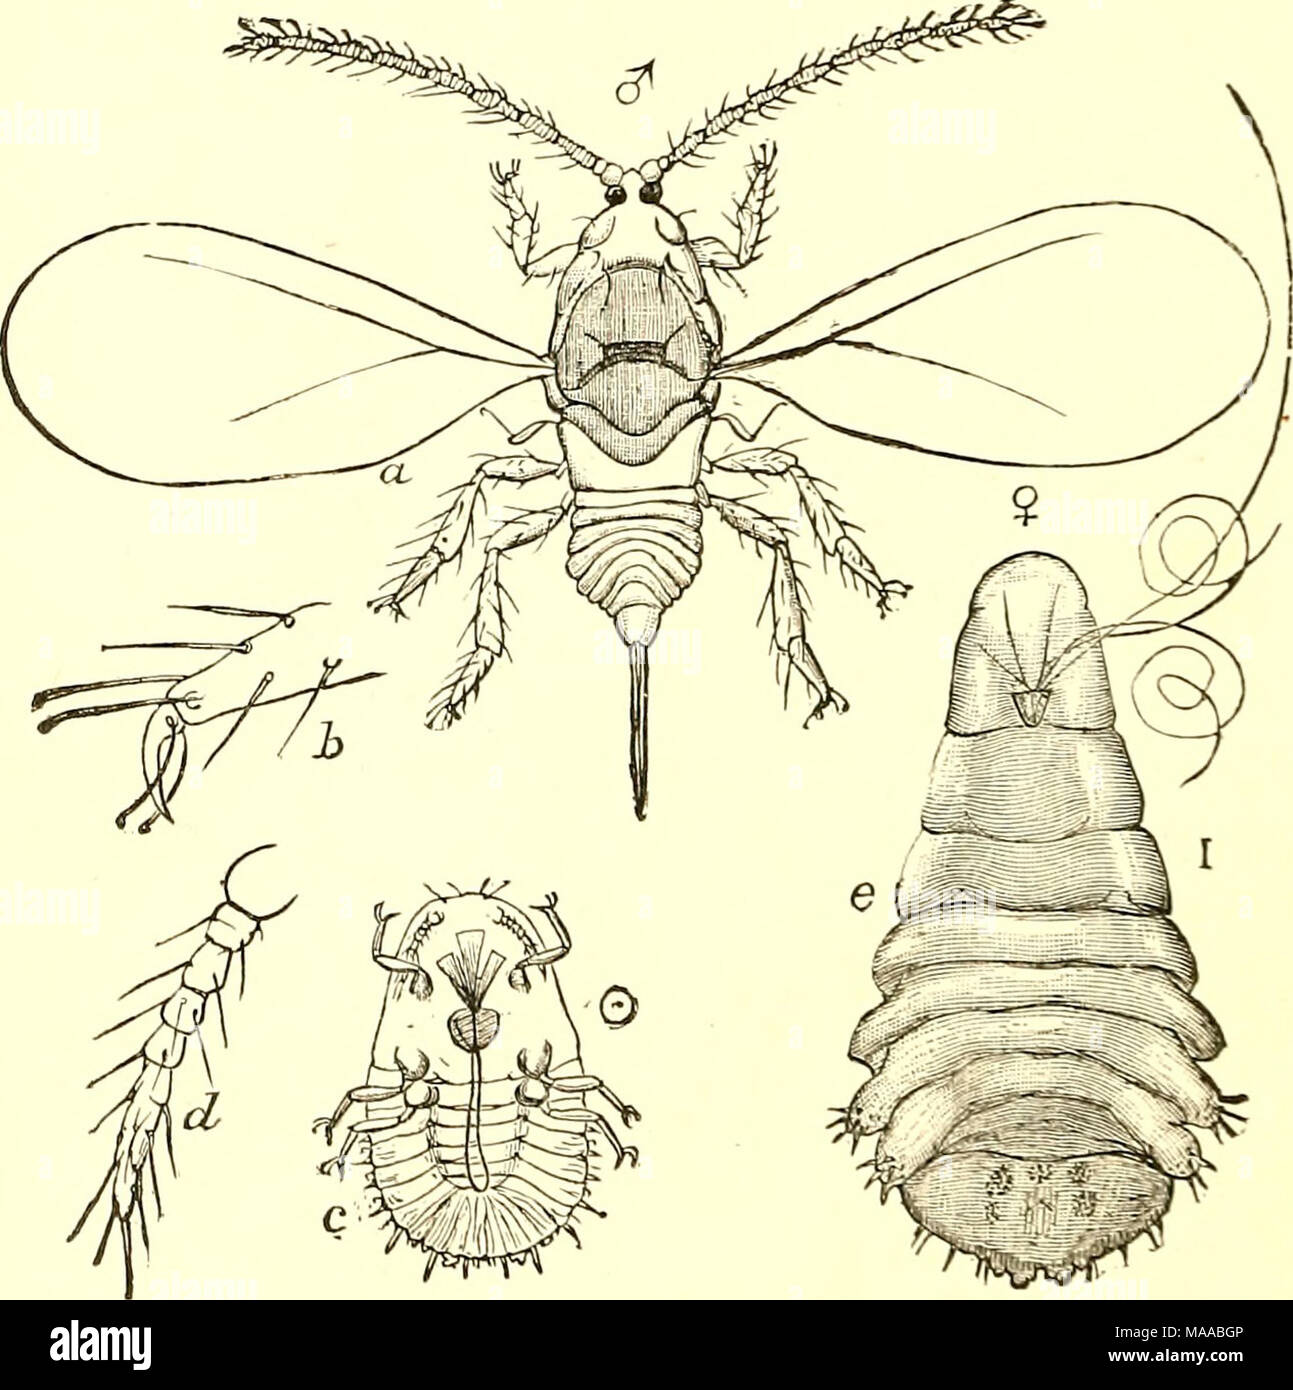 . Economic entomology for the farmer and fruit-grower [microform] : and for use as a text-book in agricultural schools and colleges . Mytilaspis pomorum.—a, male ; b, its tarsus ; c, young larva ; rf, its antenna ; c, female. close examination, even by the specialist. These scales some- times cover twigs and large branches completely : even the leaves are often infested, and not infrequently the fruit itself becomes more or less covered. It is not unusual to see in market oranges and lemons more or less spotted by these oyster-shell scales, and I have seen lemons from Mediterranean countries w Stock Photo